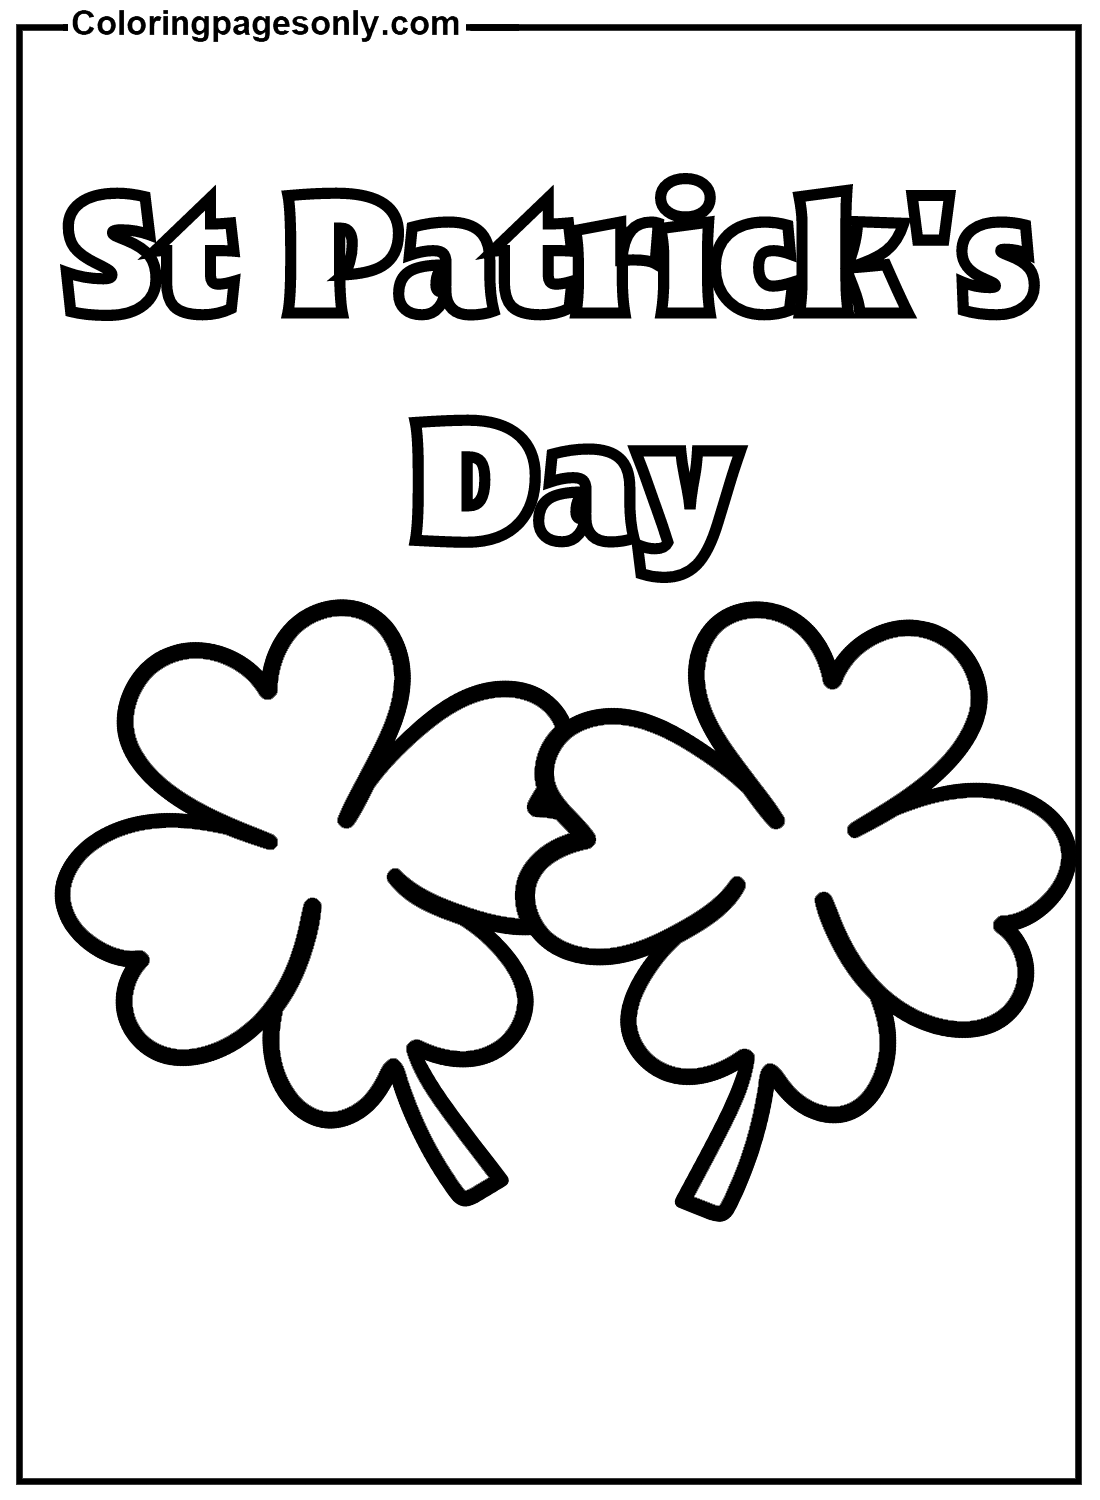 St. Patrick's Day With Shamrock Image Coloring Pages